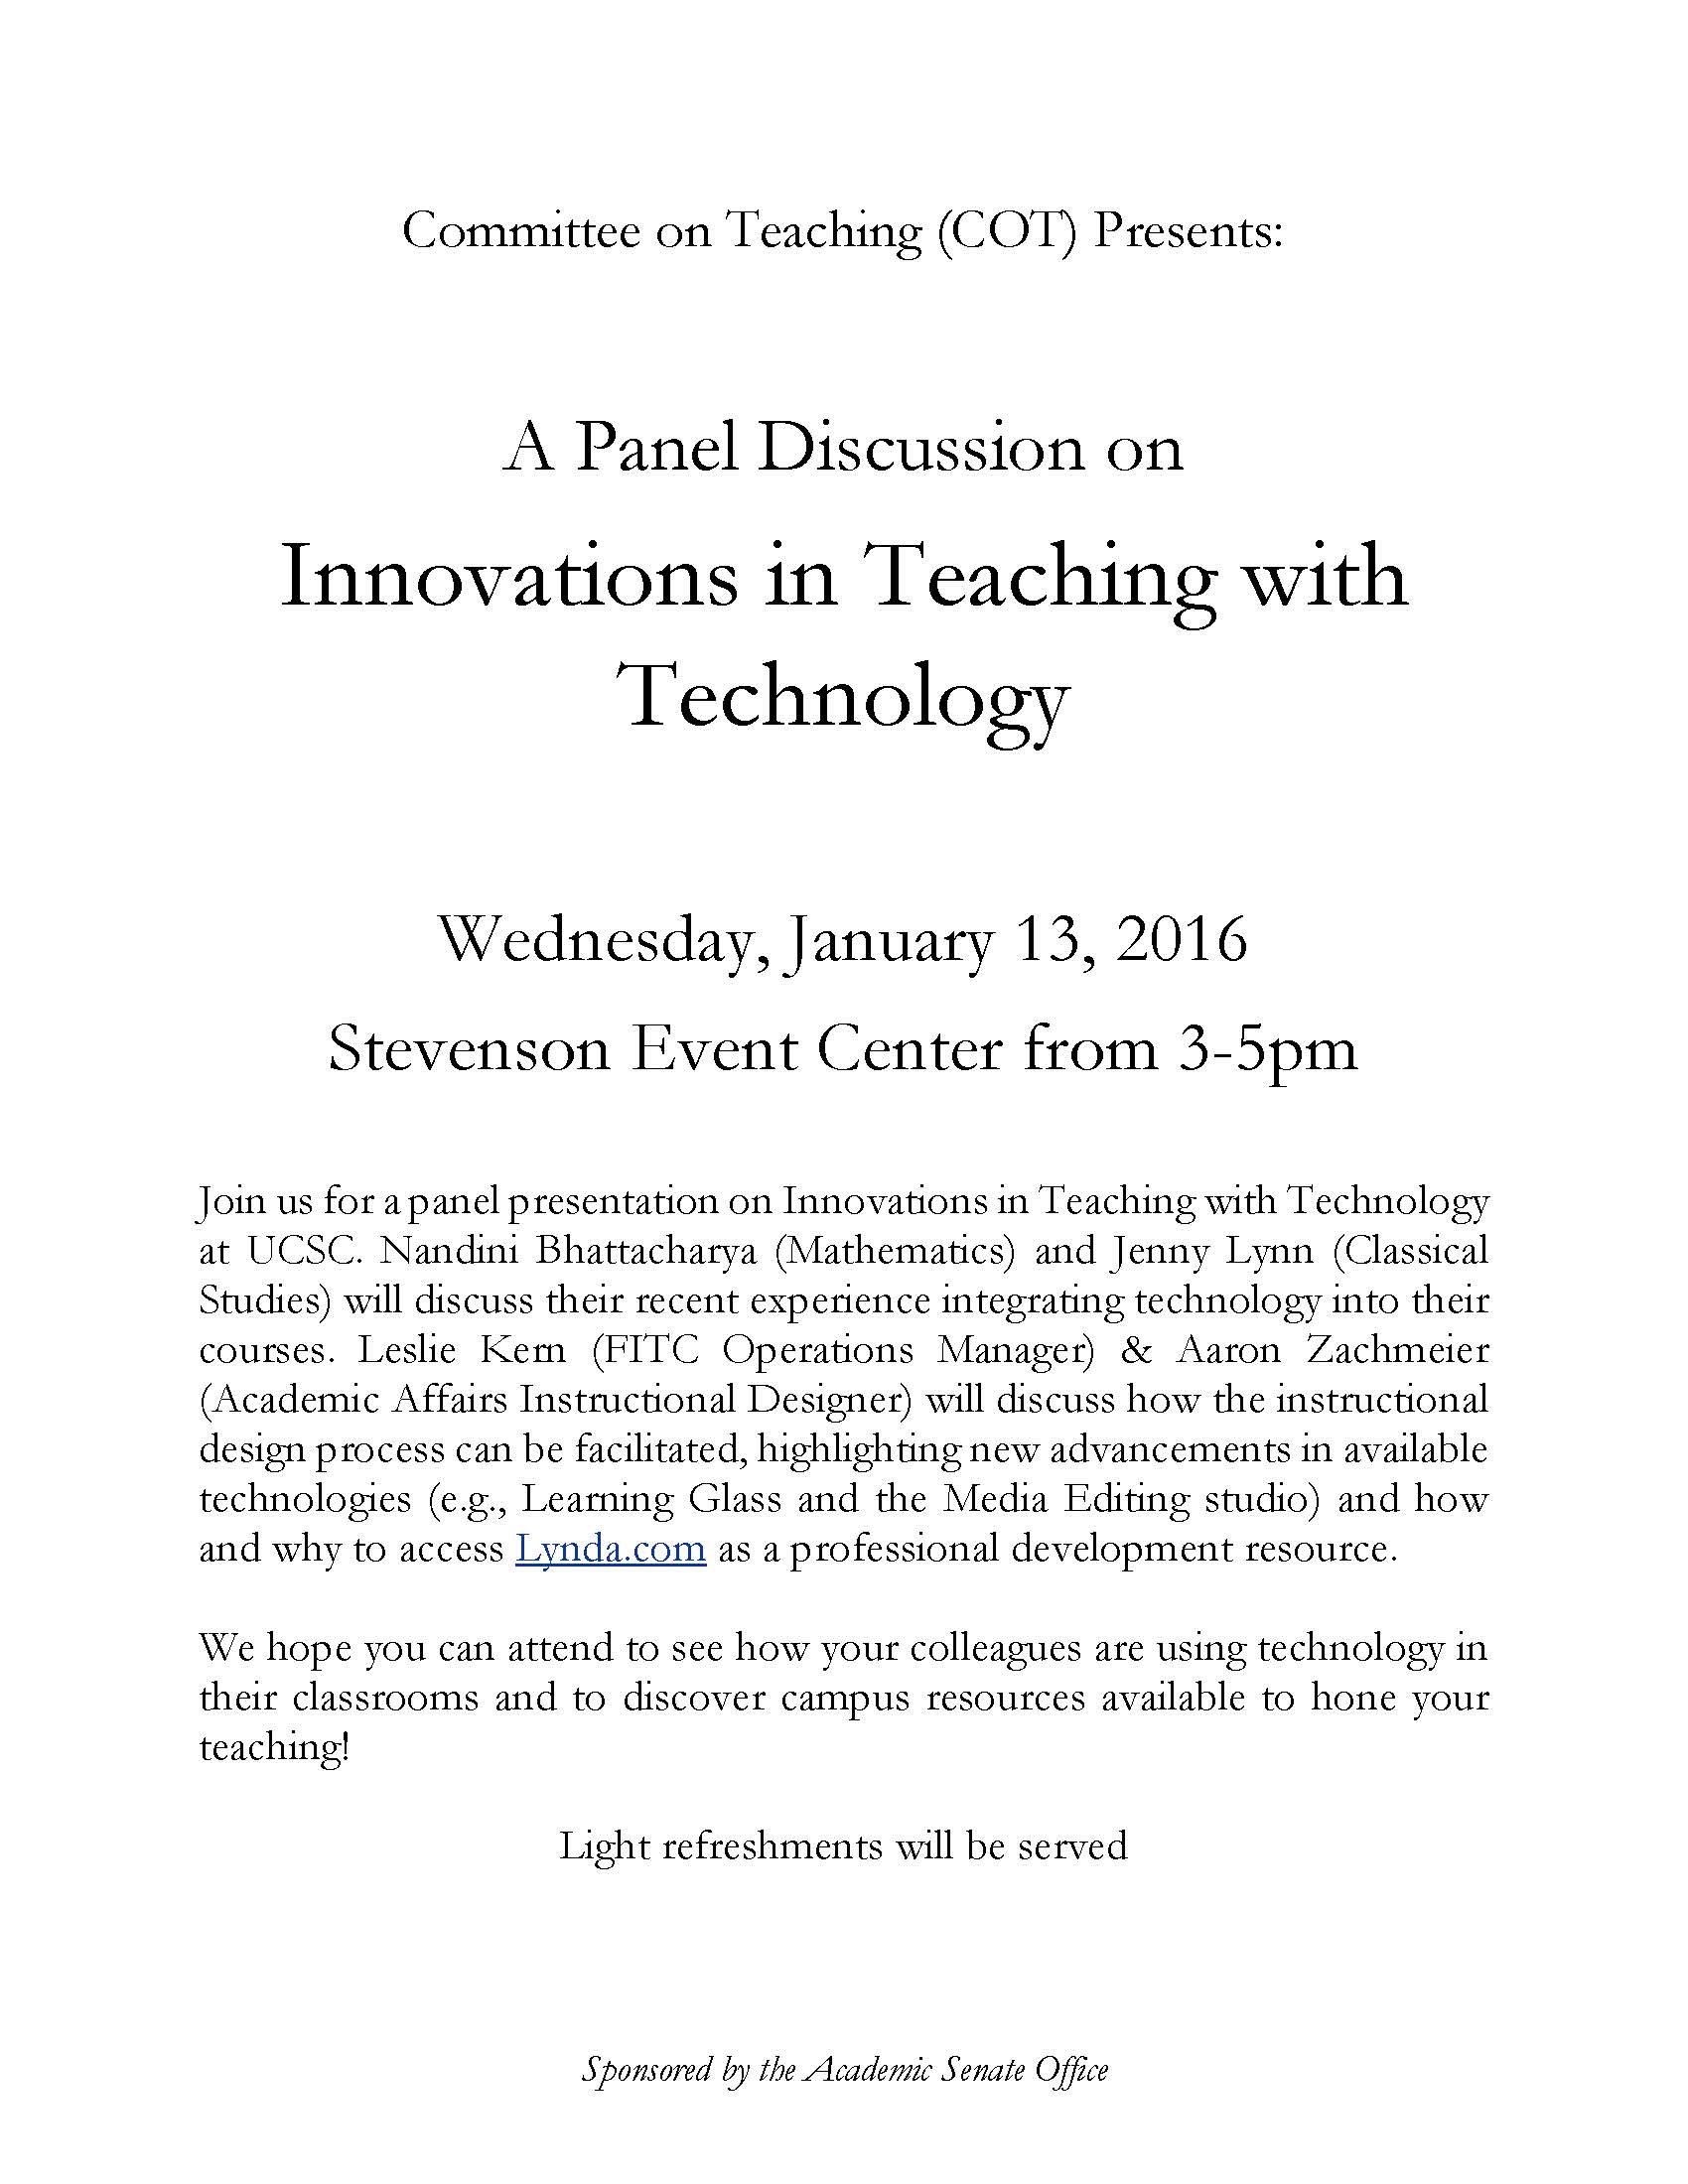 Forum on Innovations in Teaching with Technology